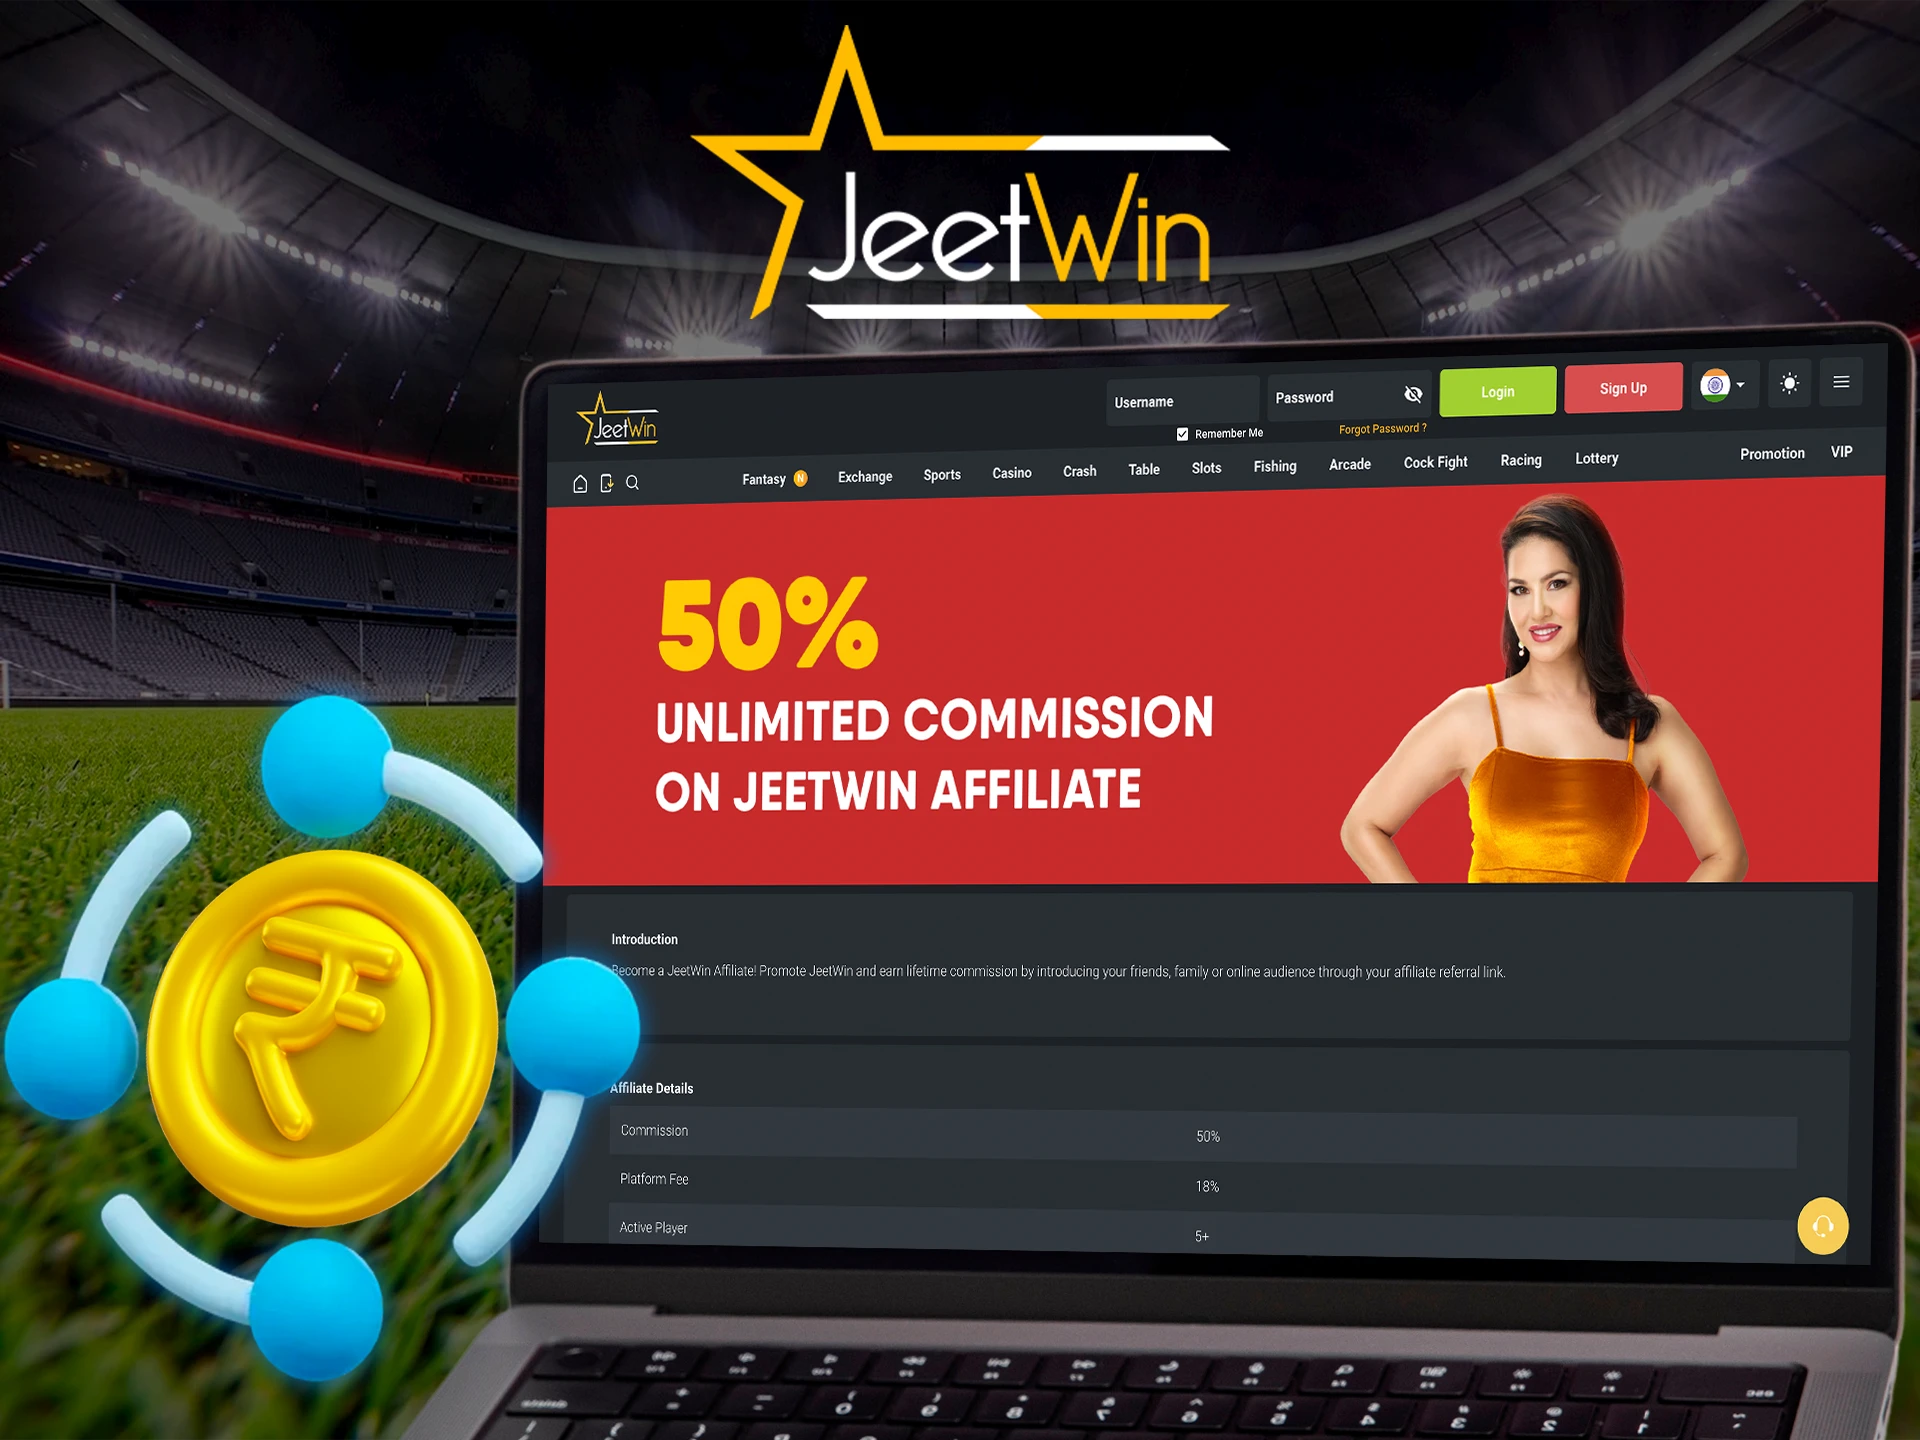 Find out about JeetWin's affiliate programme.